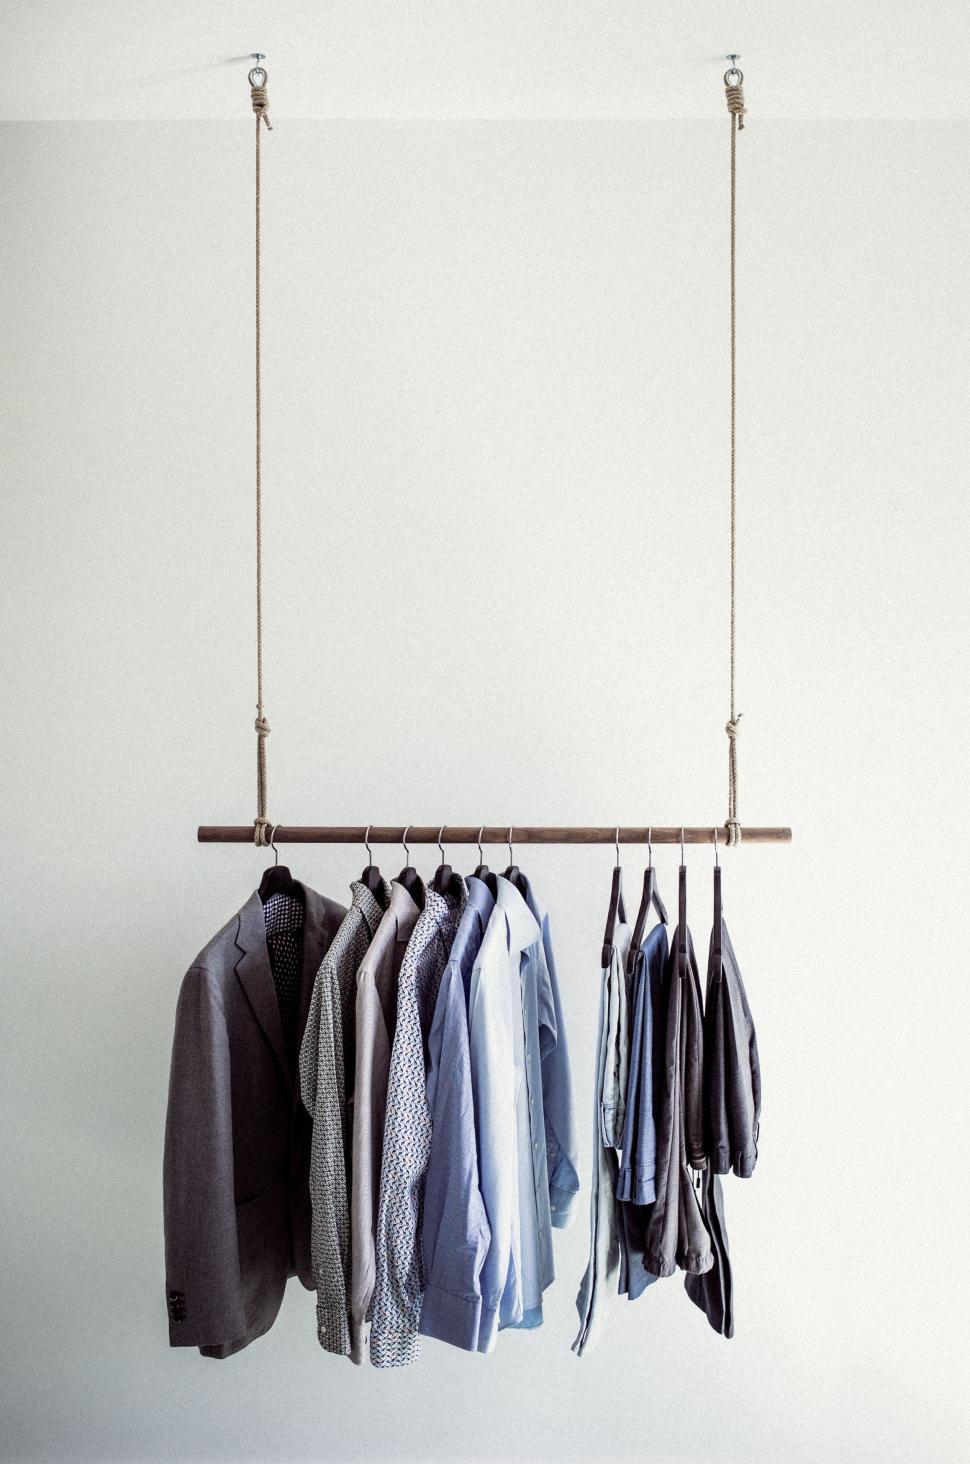 Free Image of Assorted Shirts Hanging on a Rack 